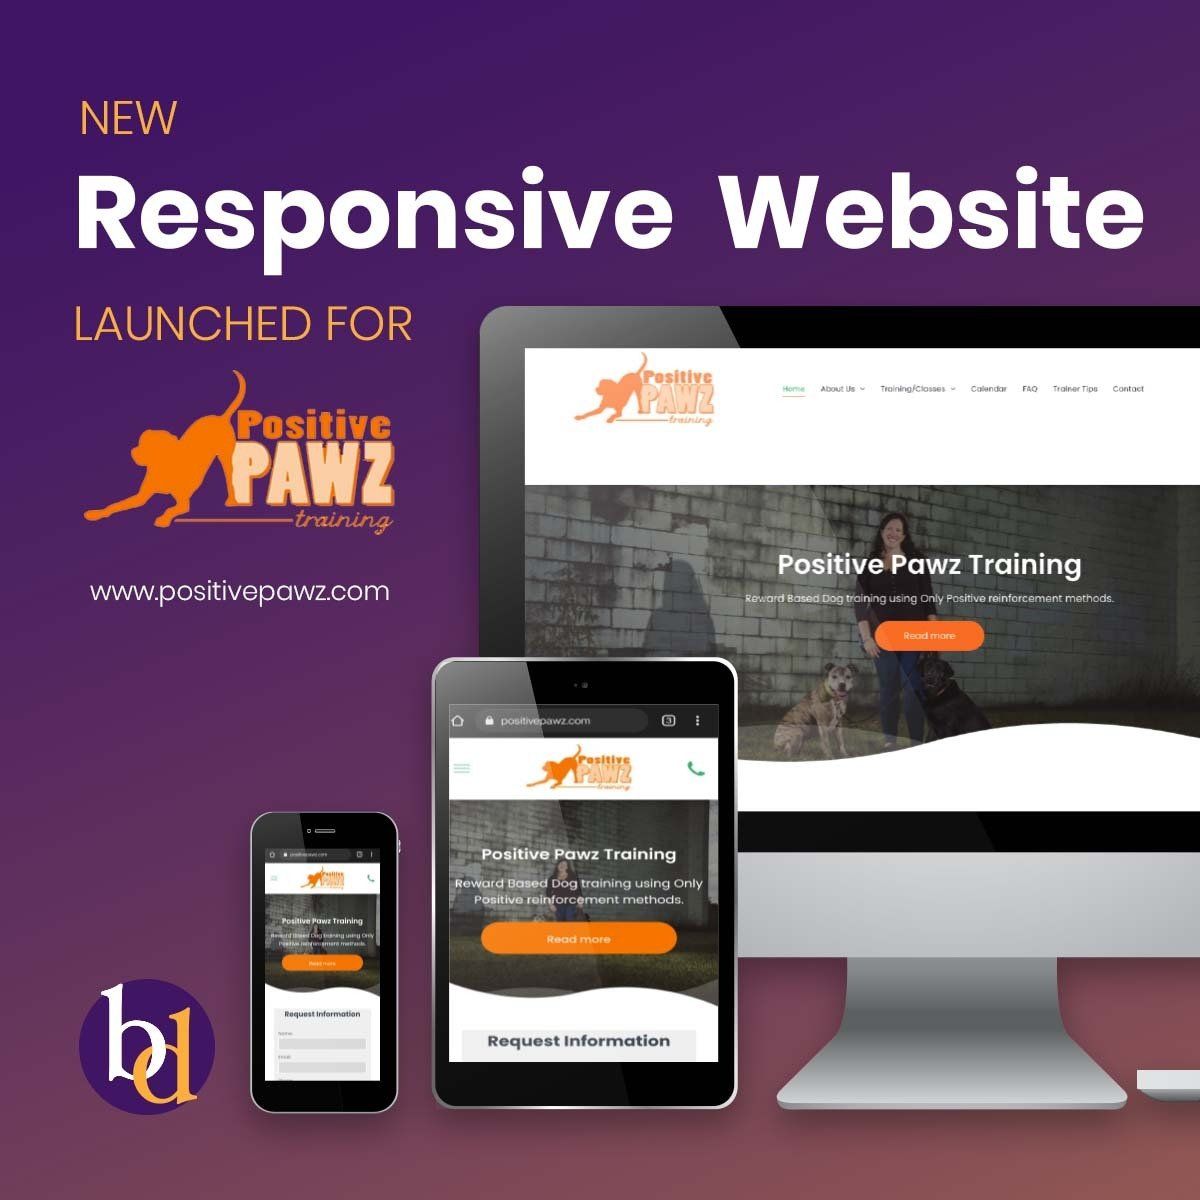 NEW RESPONSIVE WEBSITE launched for Positive Pawz Training